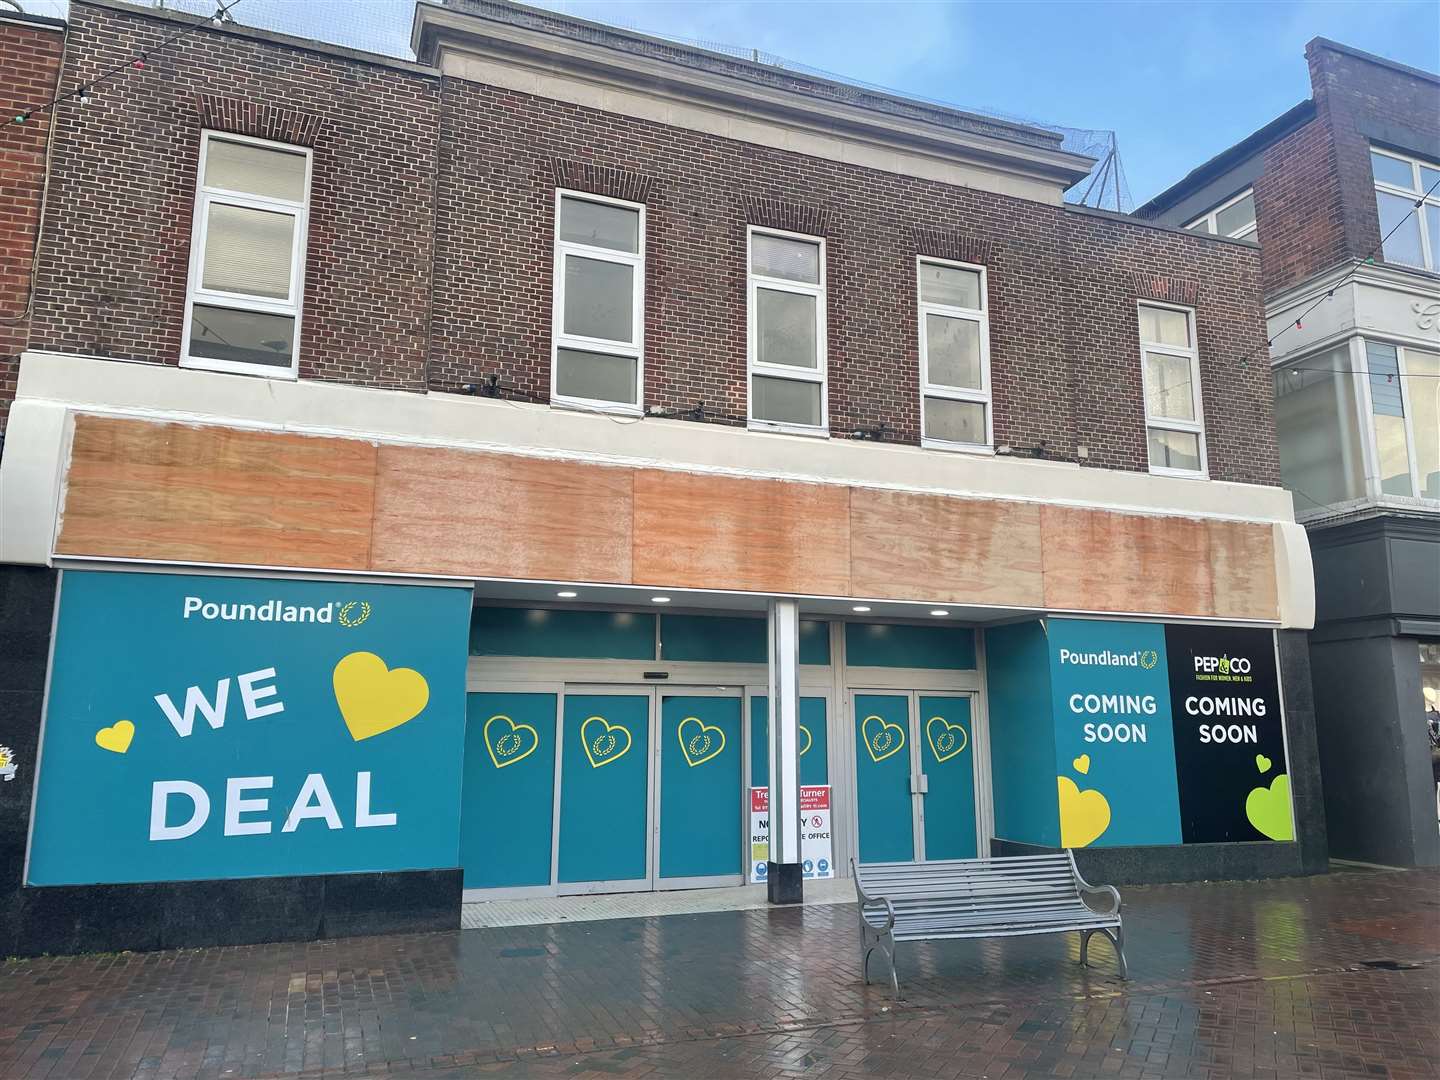 Poundland will move into the former M&S in Deal High Street next month